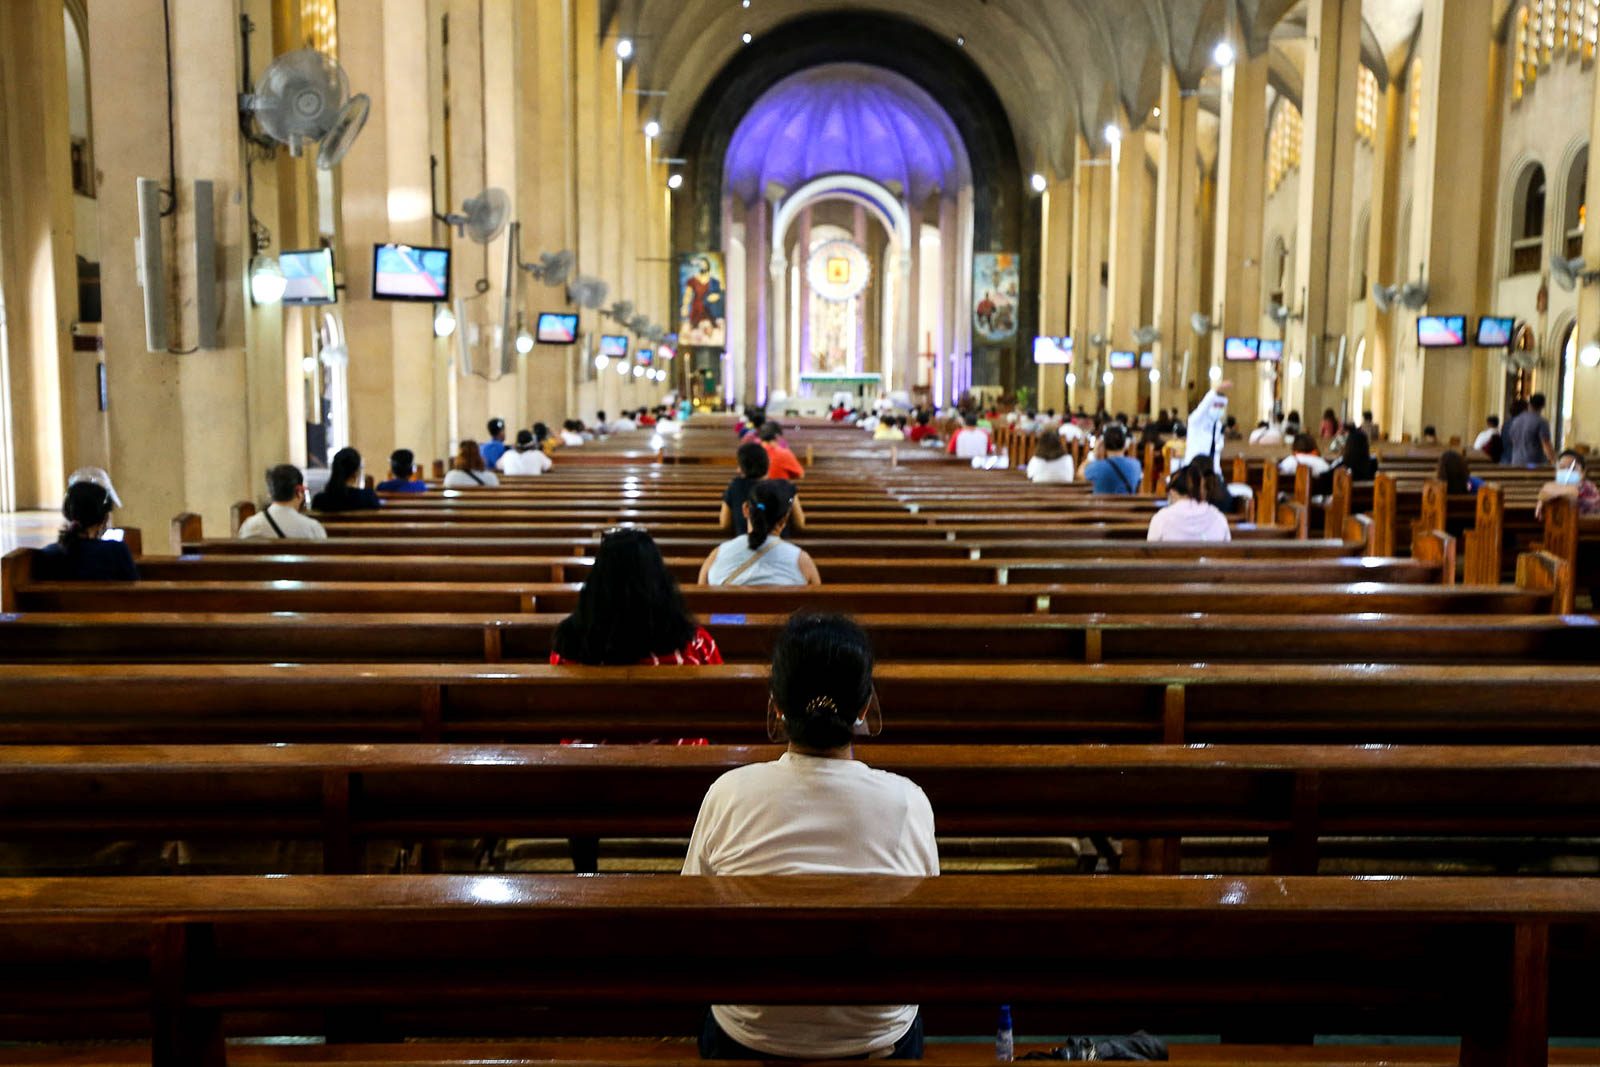 Ahead of Simbang Gabi, gov’t allows 30% capacity for religious gatherings in GCQ areas